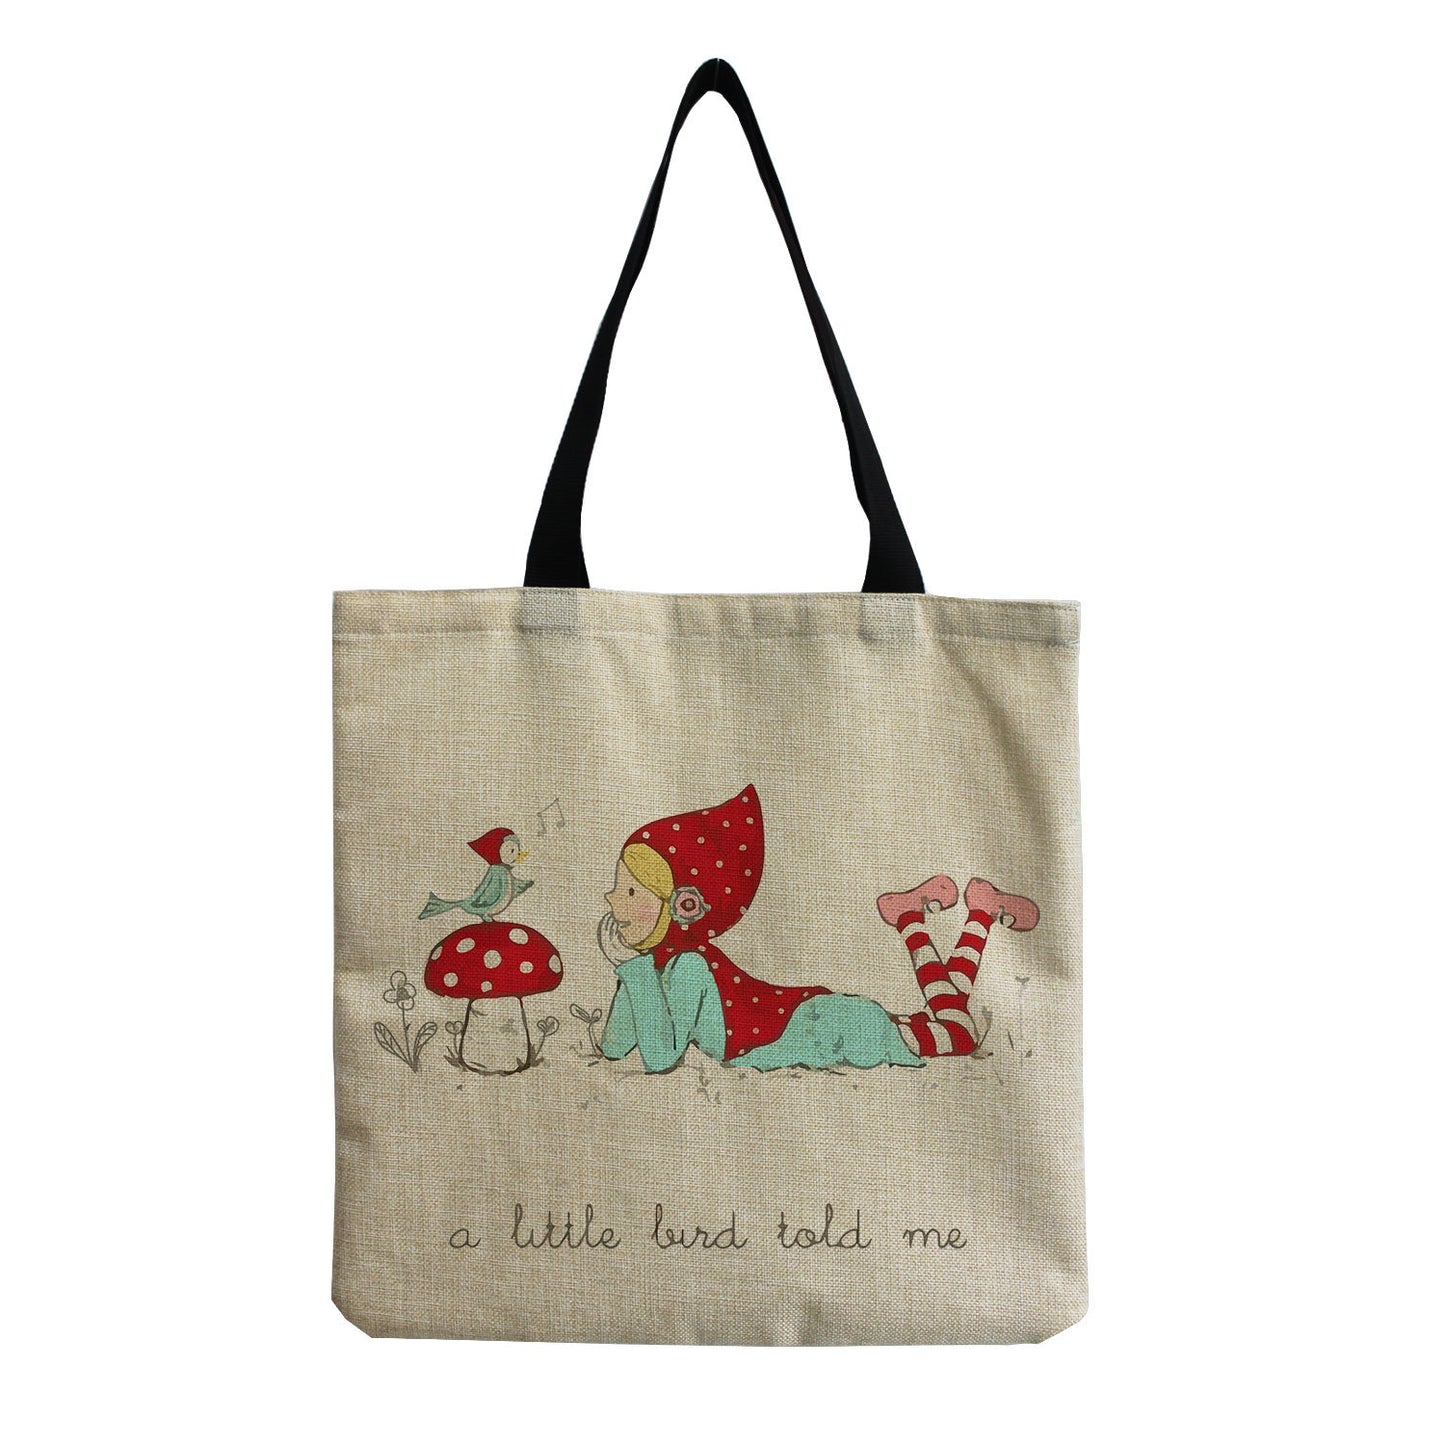 SproutBags Mushroom One-shoulder Portable Reusable Cute Totebag